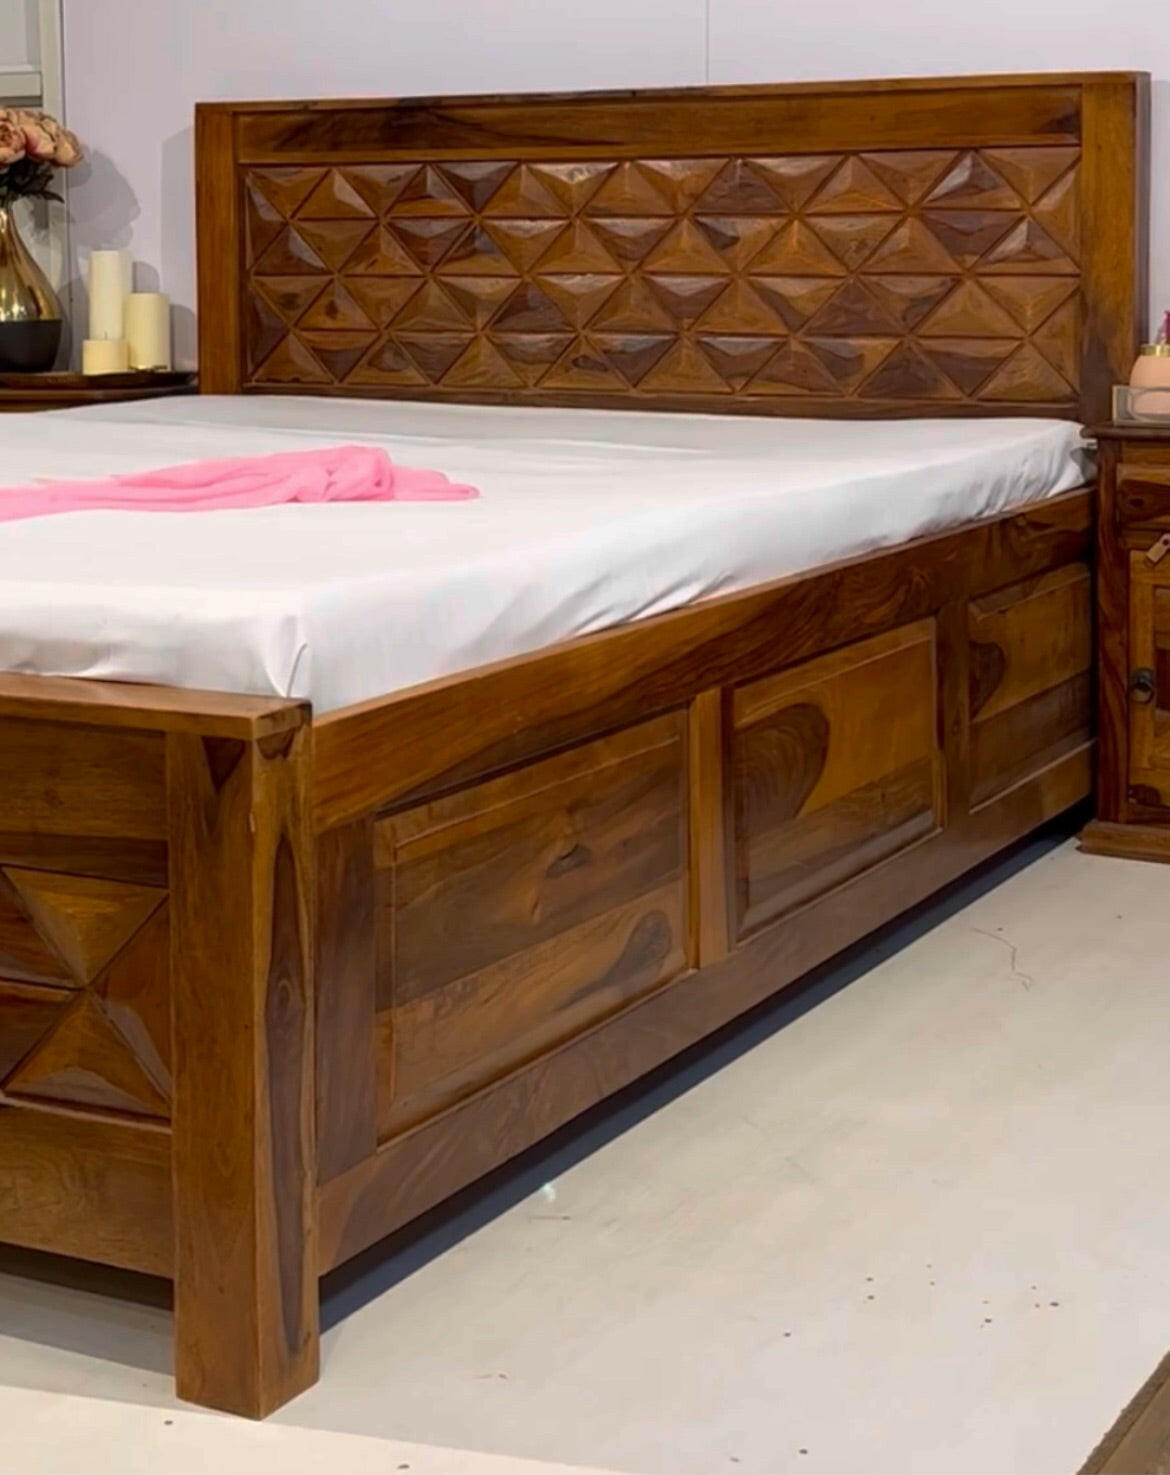 bed, low price wooden bed, wooden bed, wooden double beds, king size bed, queen size bed, wooden bed, bed frame, king bed, storage bed, modern bed, luxury beds, platform bed, solid wood bed Bangalore